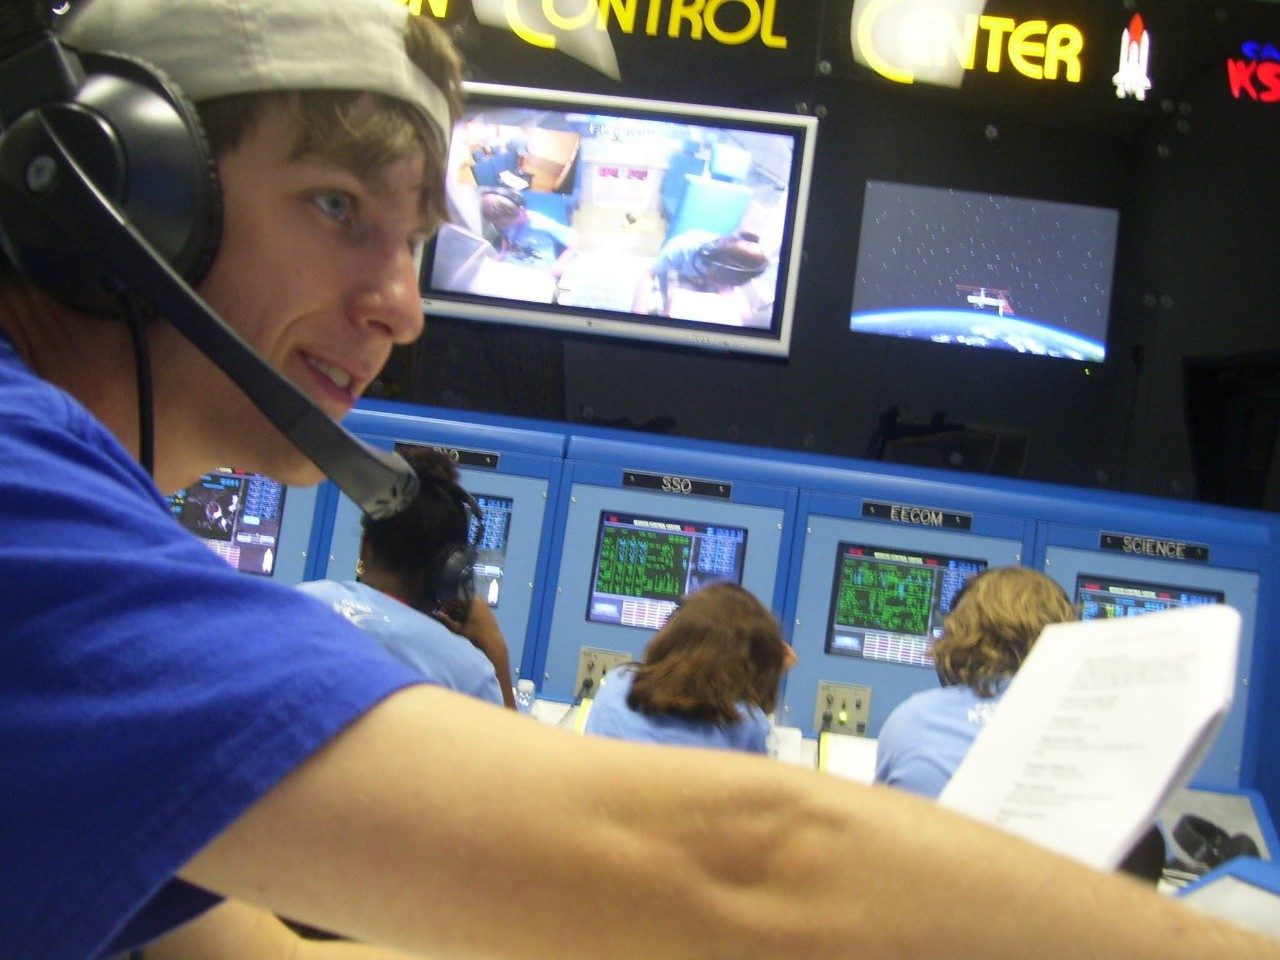 Barry running a simulated shuttle mission in 2008, located in what is todays Lockheed Martin STAR Center, where he currently works.